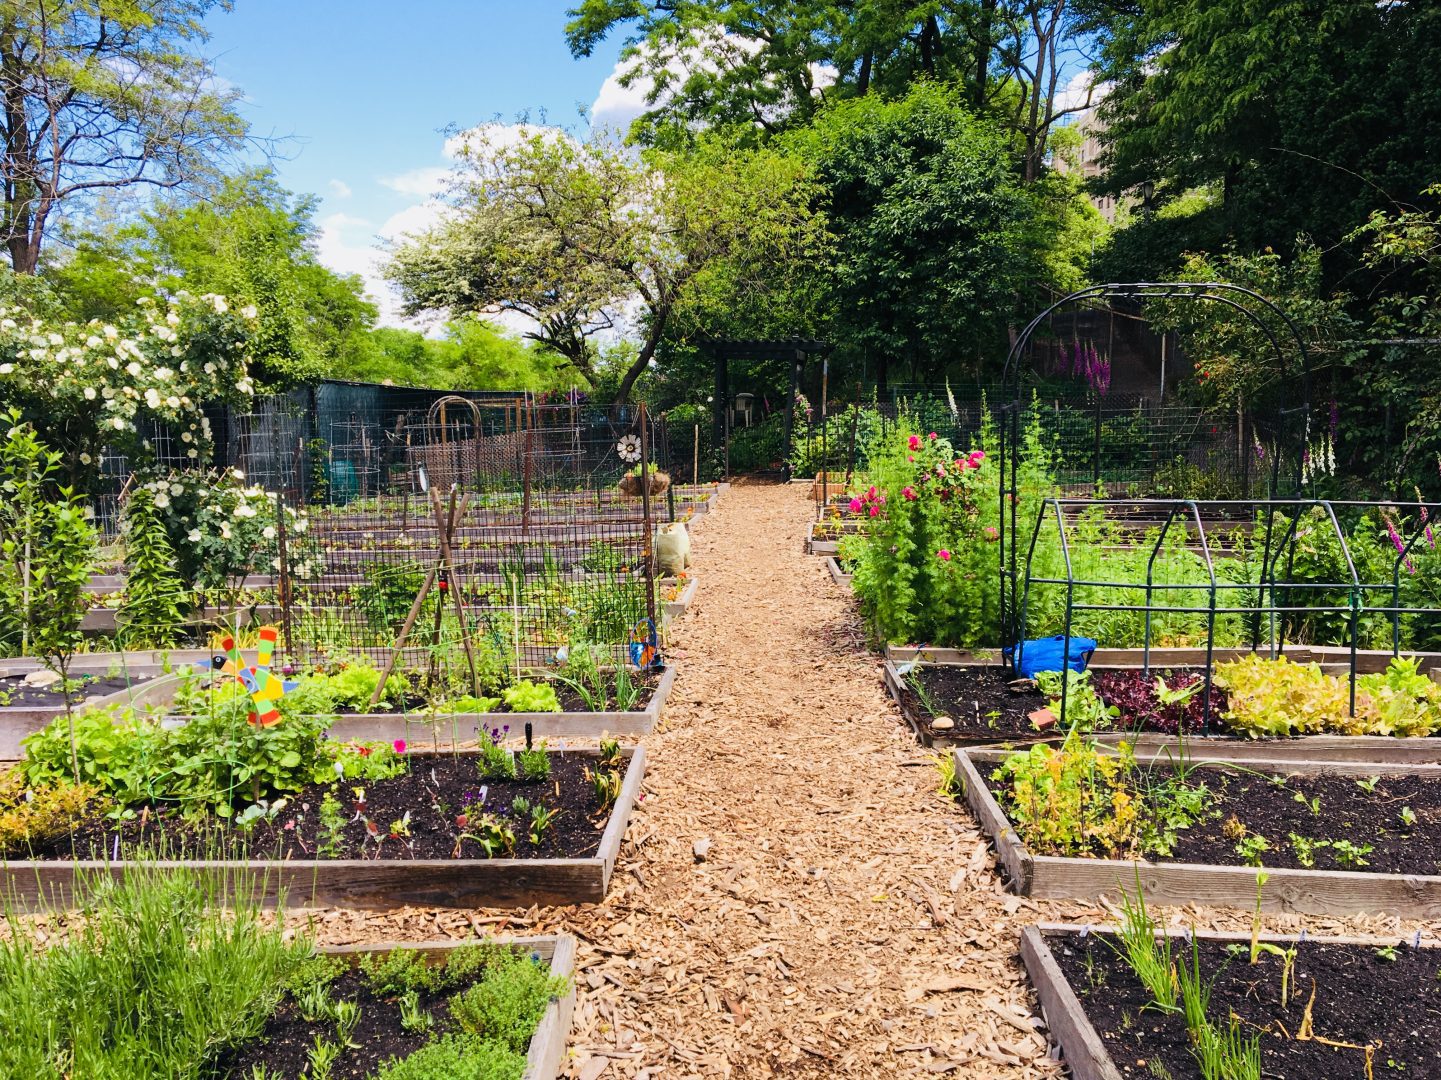 A garden with raised beds features vegetables, trees, and perennials